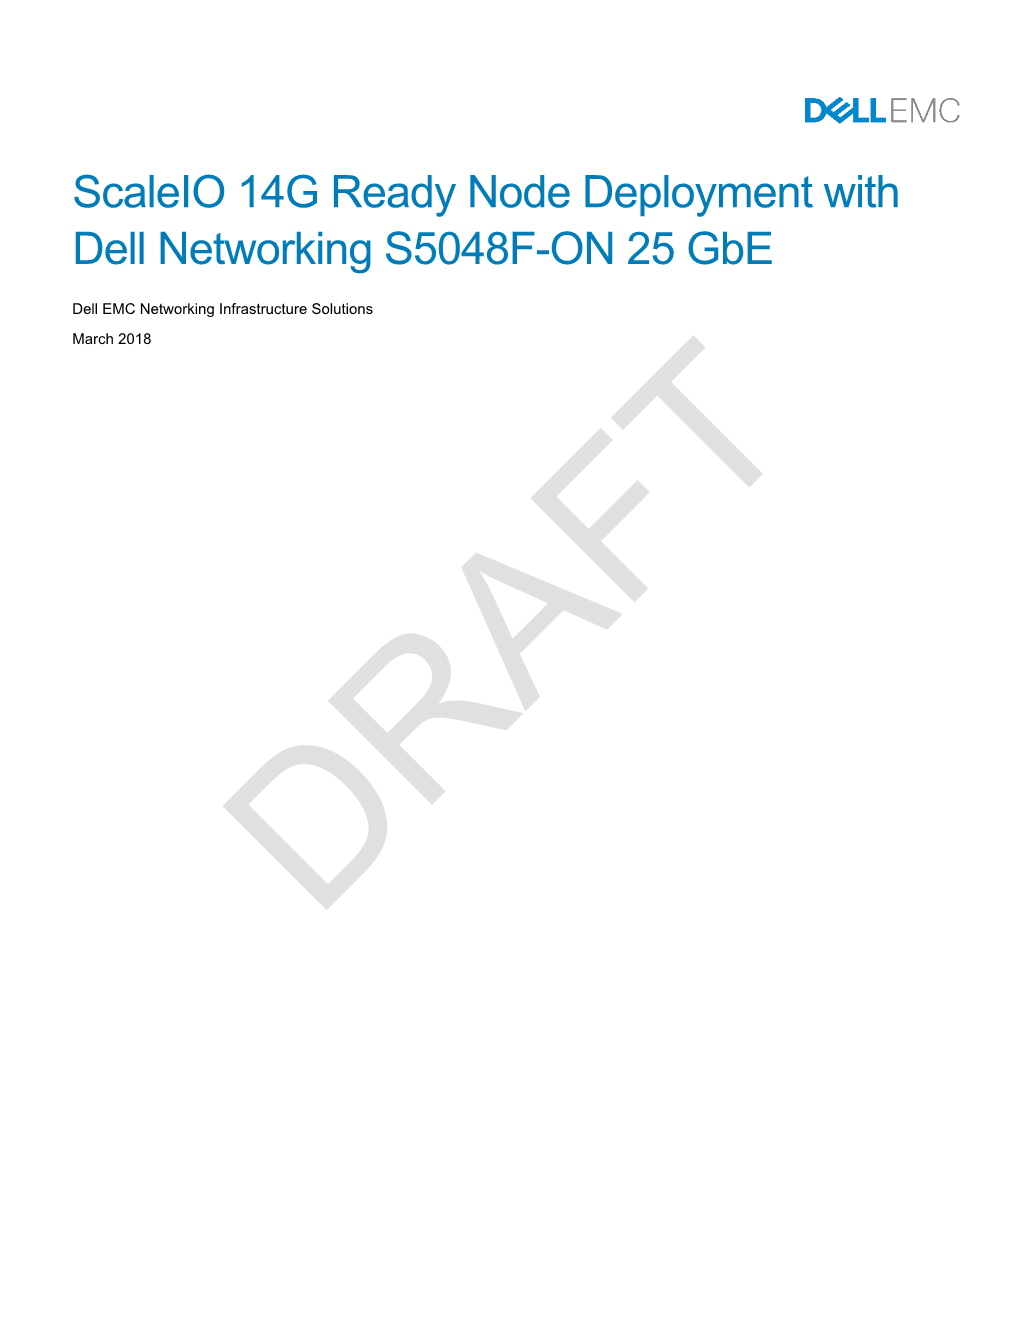 Scaleio 14G with AMS and 25Gbe Networking